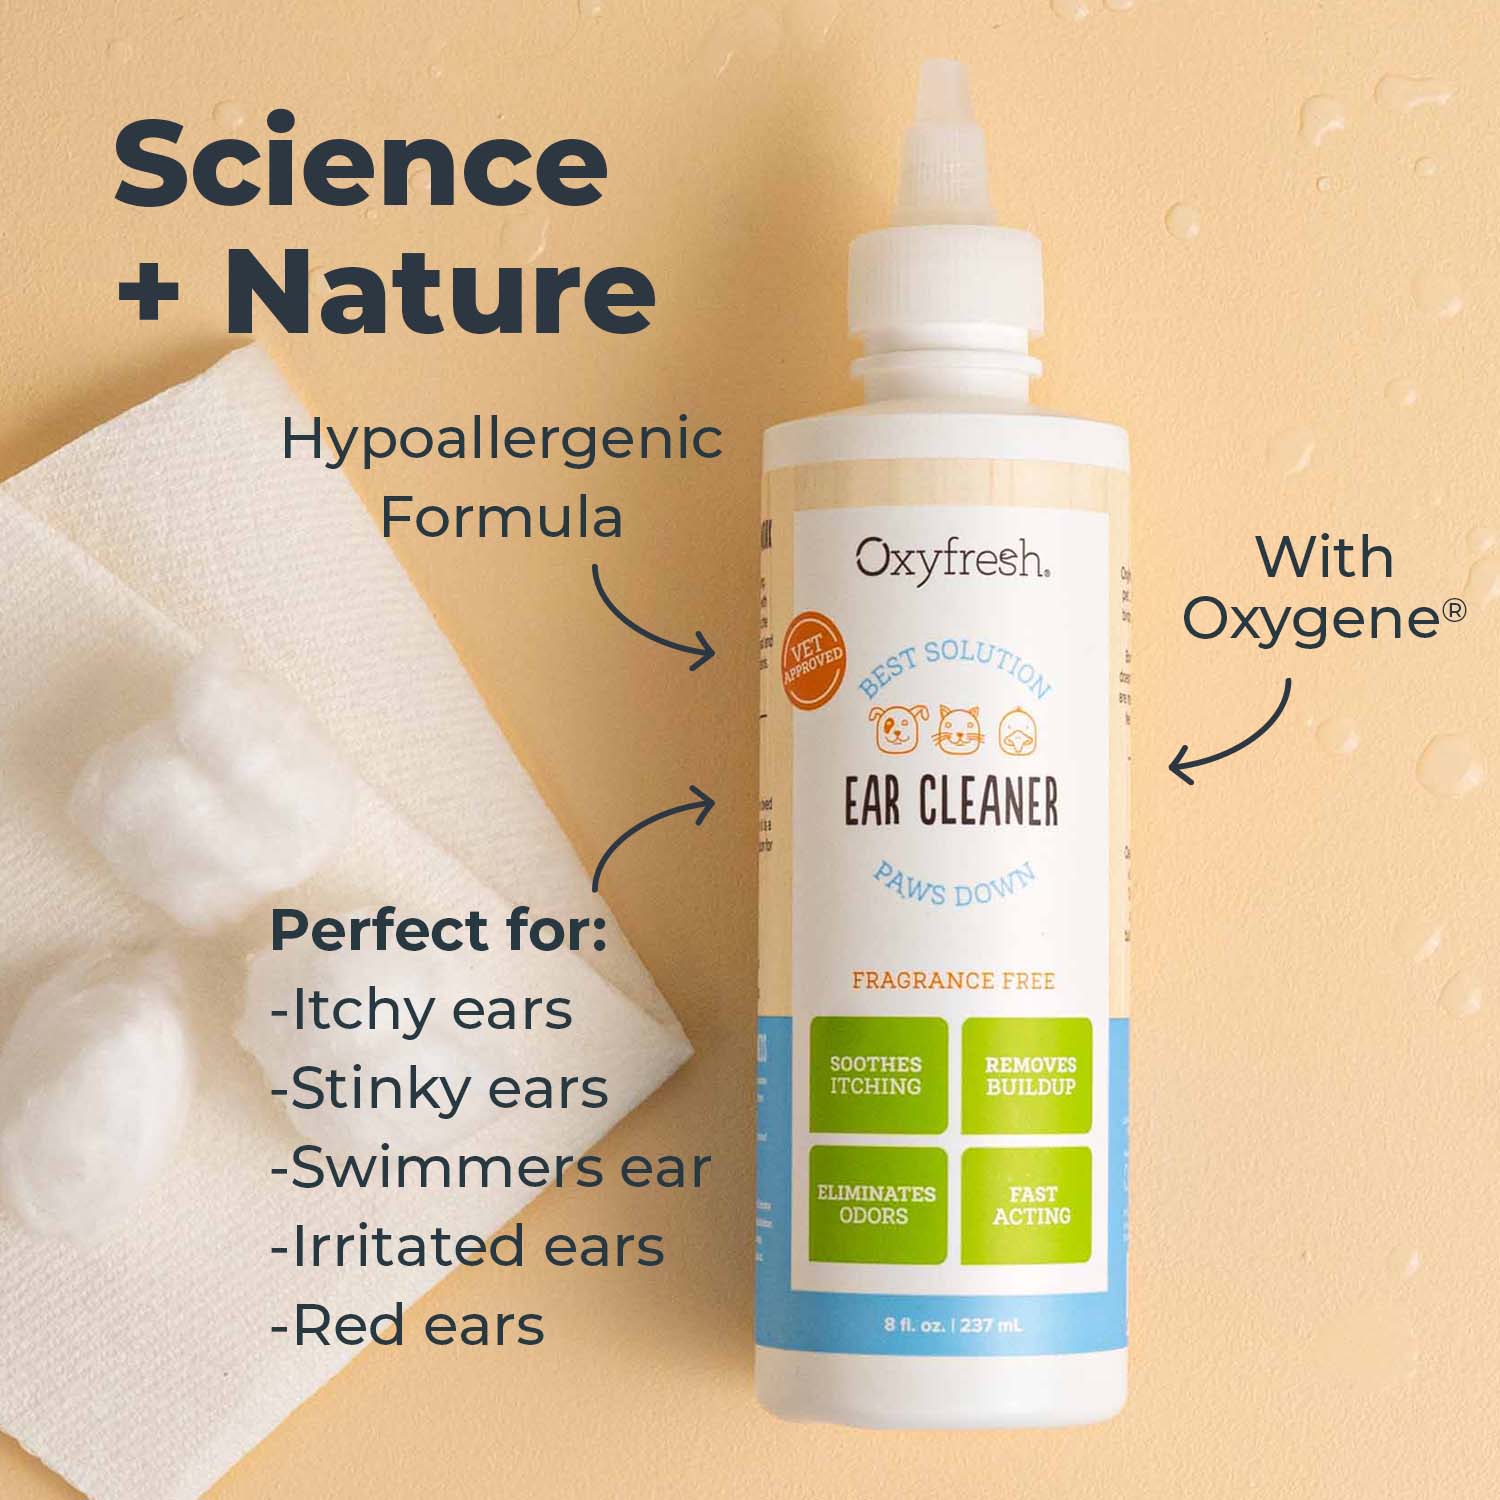 oxyfresh pet ear cleaner with cotton balls and the words "science + nature. Hypoallergenic formula. With Oxygene. Perfect for itchy ears, stinky ears, swimmers ear, irritated ears, red ears"